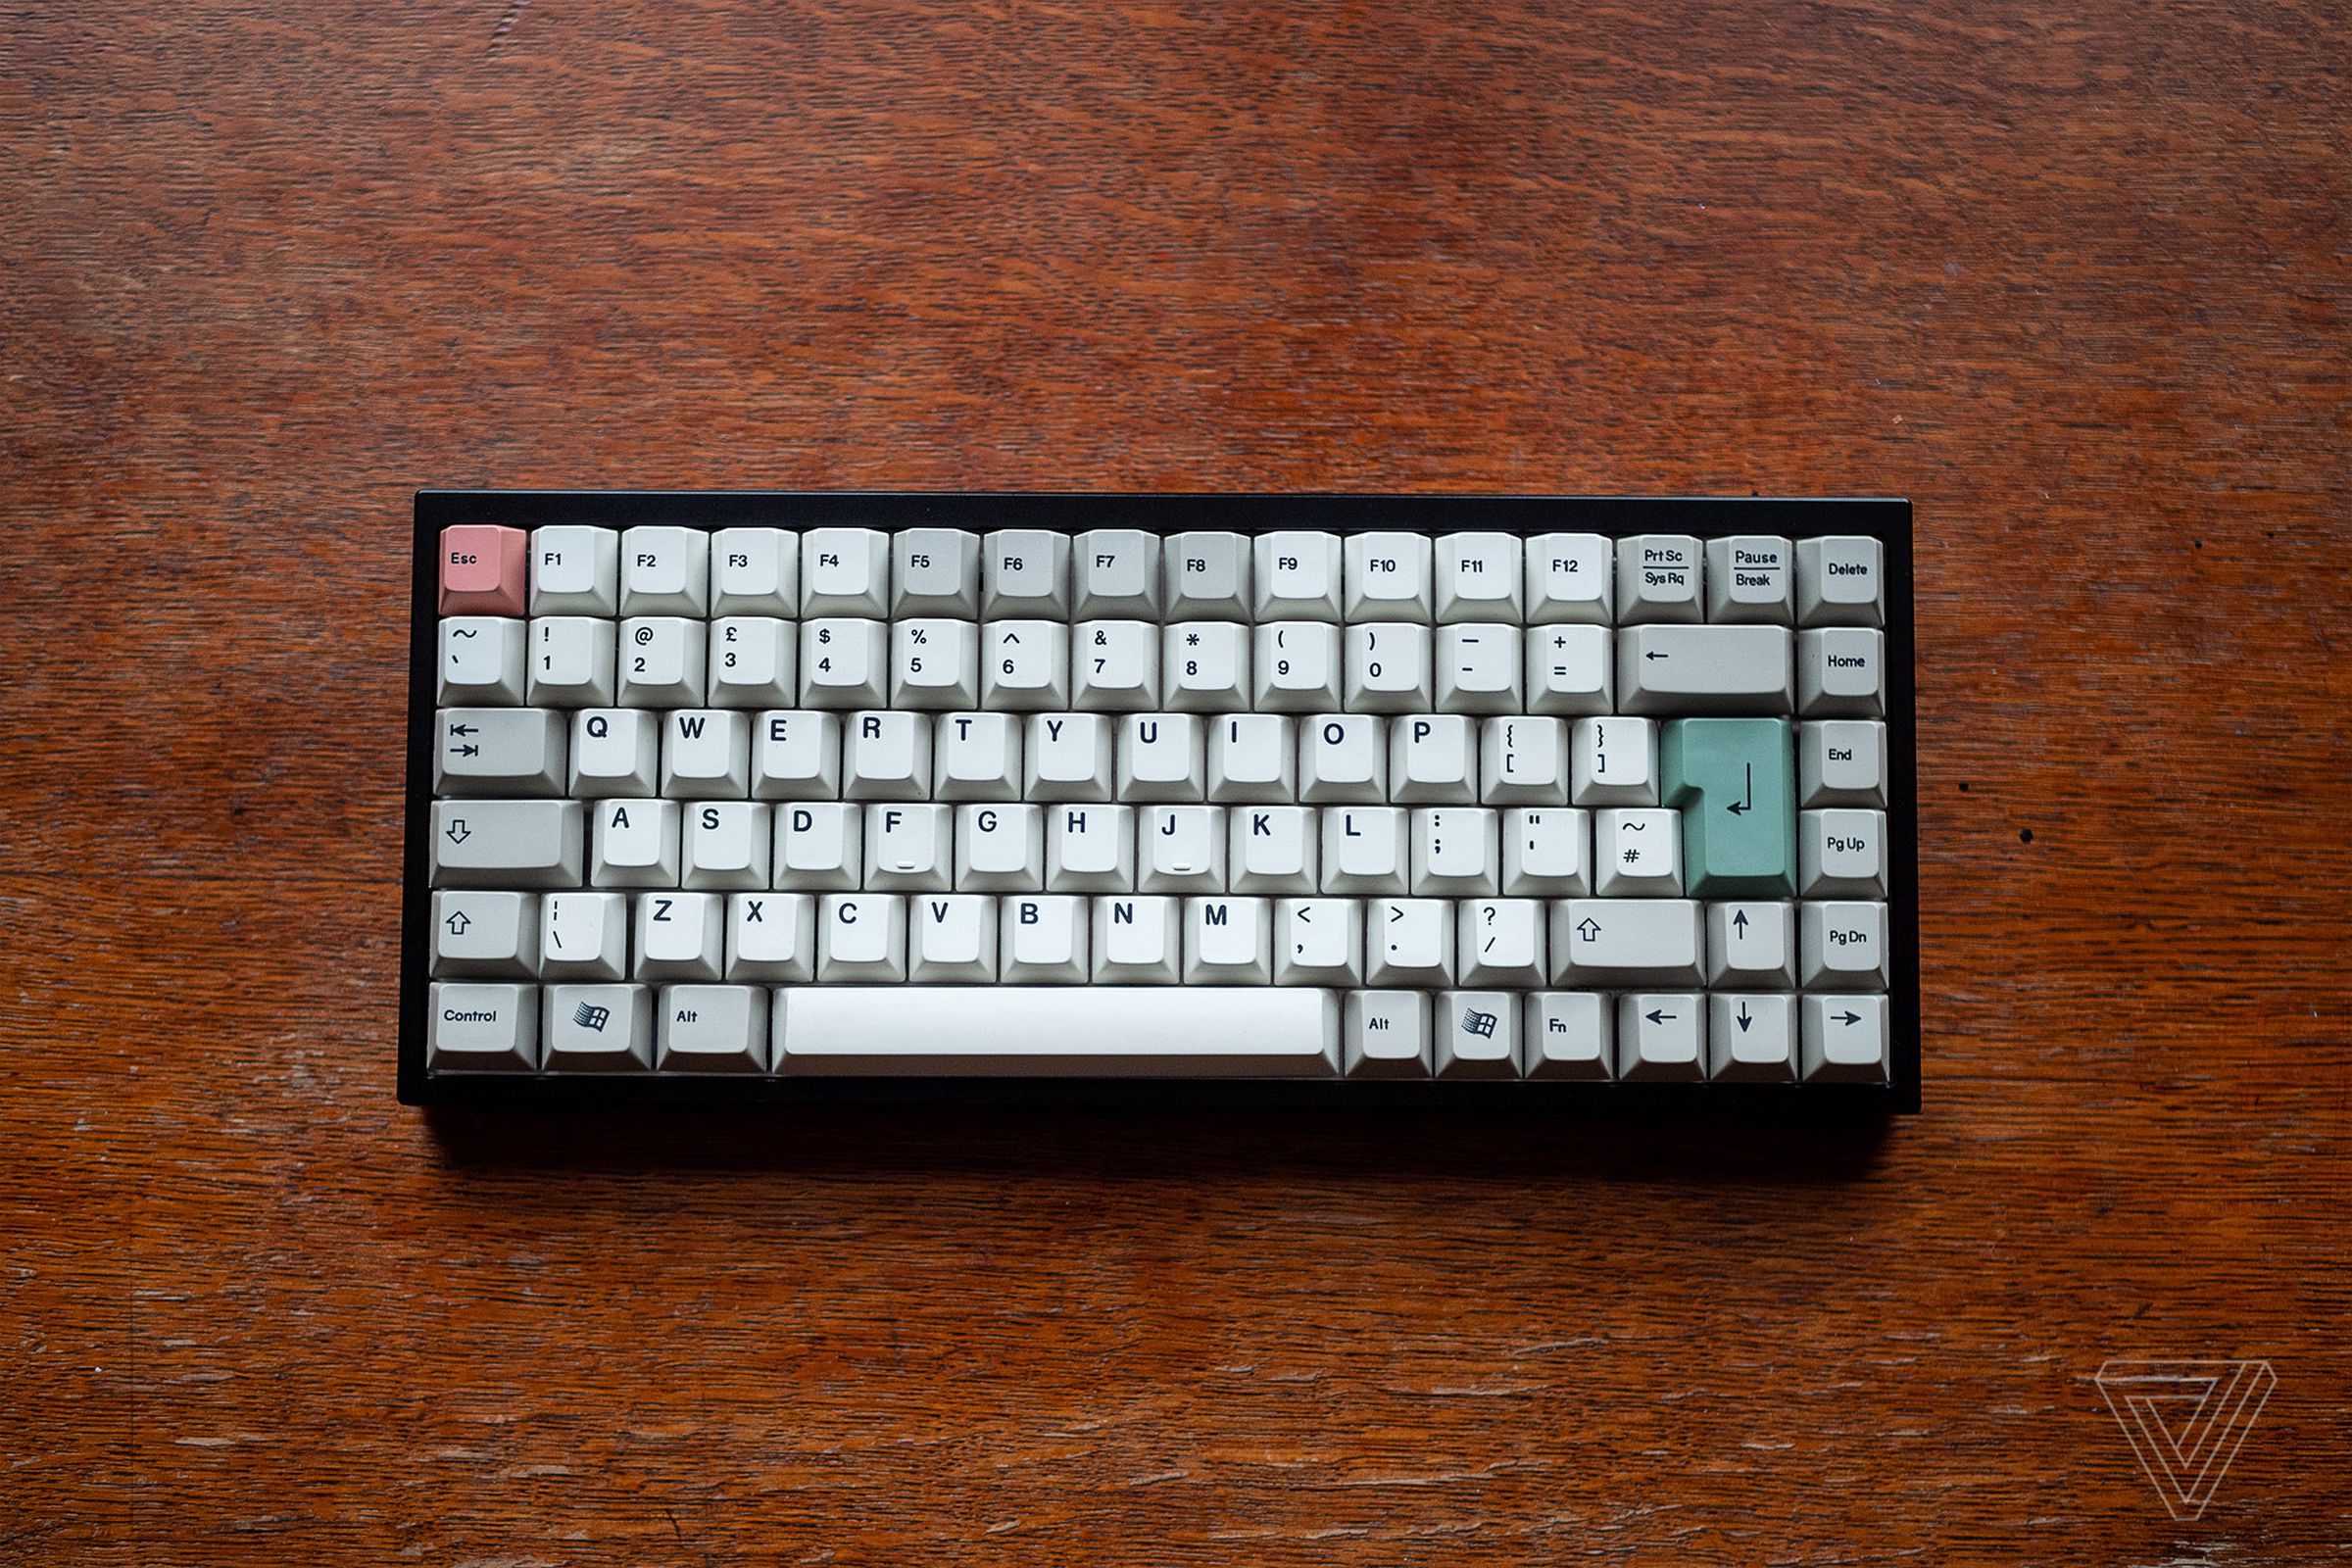 I built a board with a 75 percent layout, so it omits the numpad, and squeezes the arrow keys and function row into a compact layout.